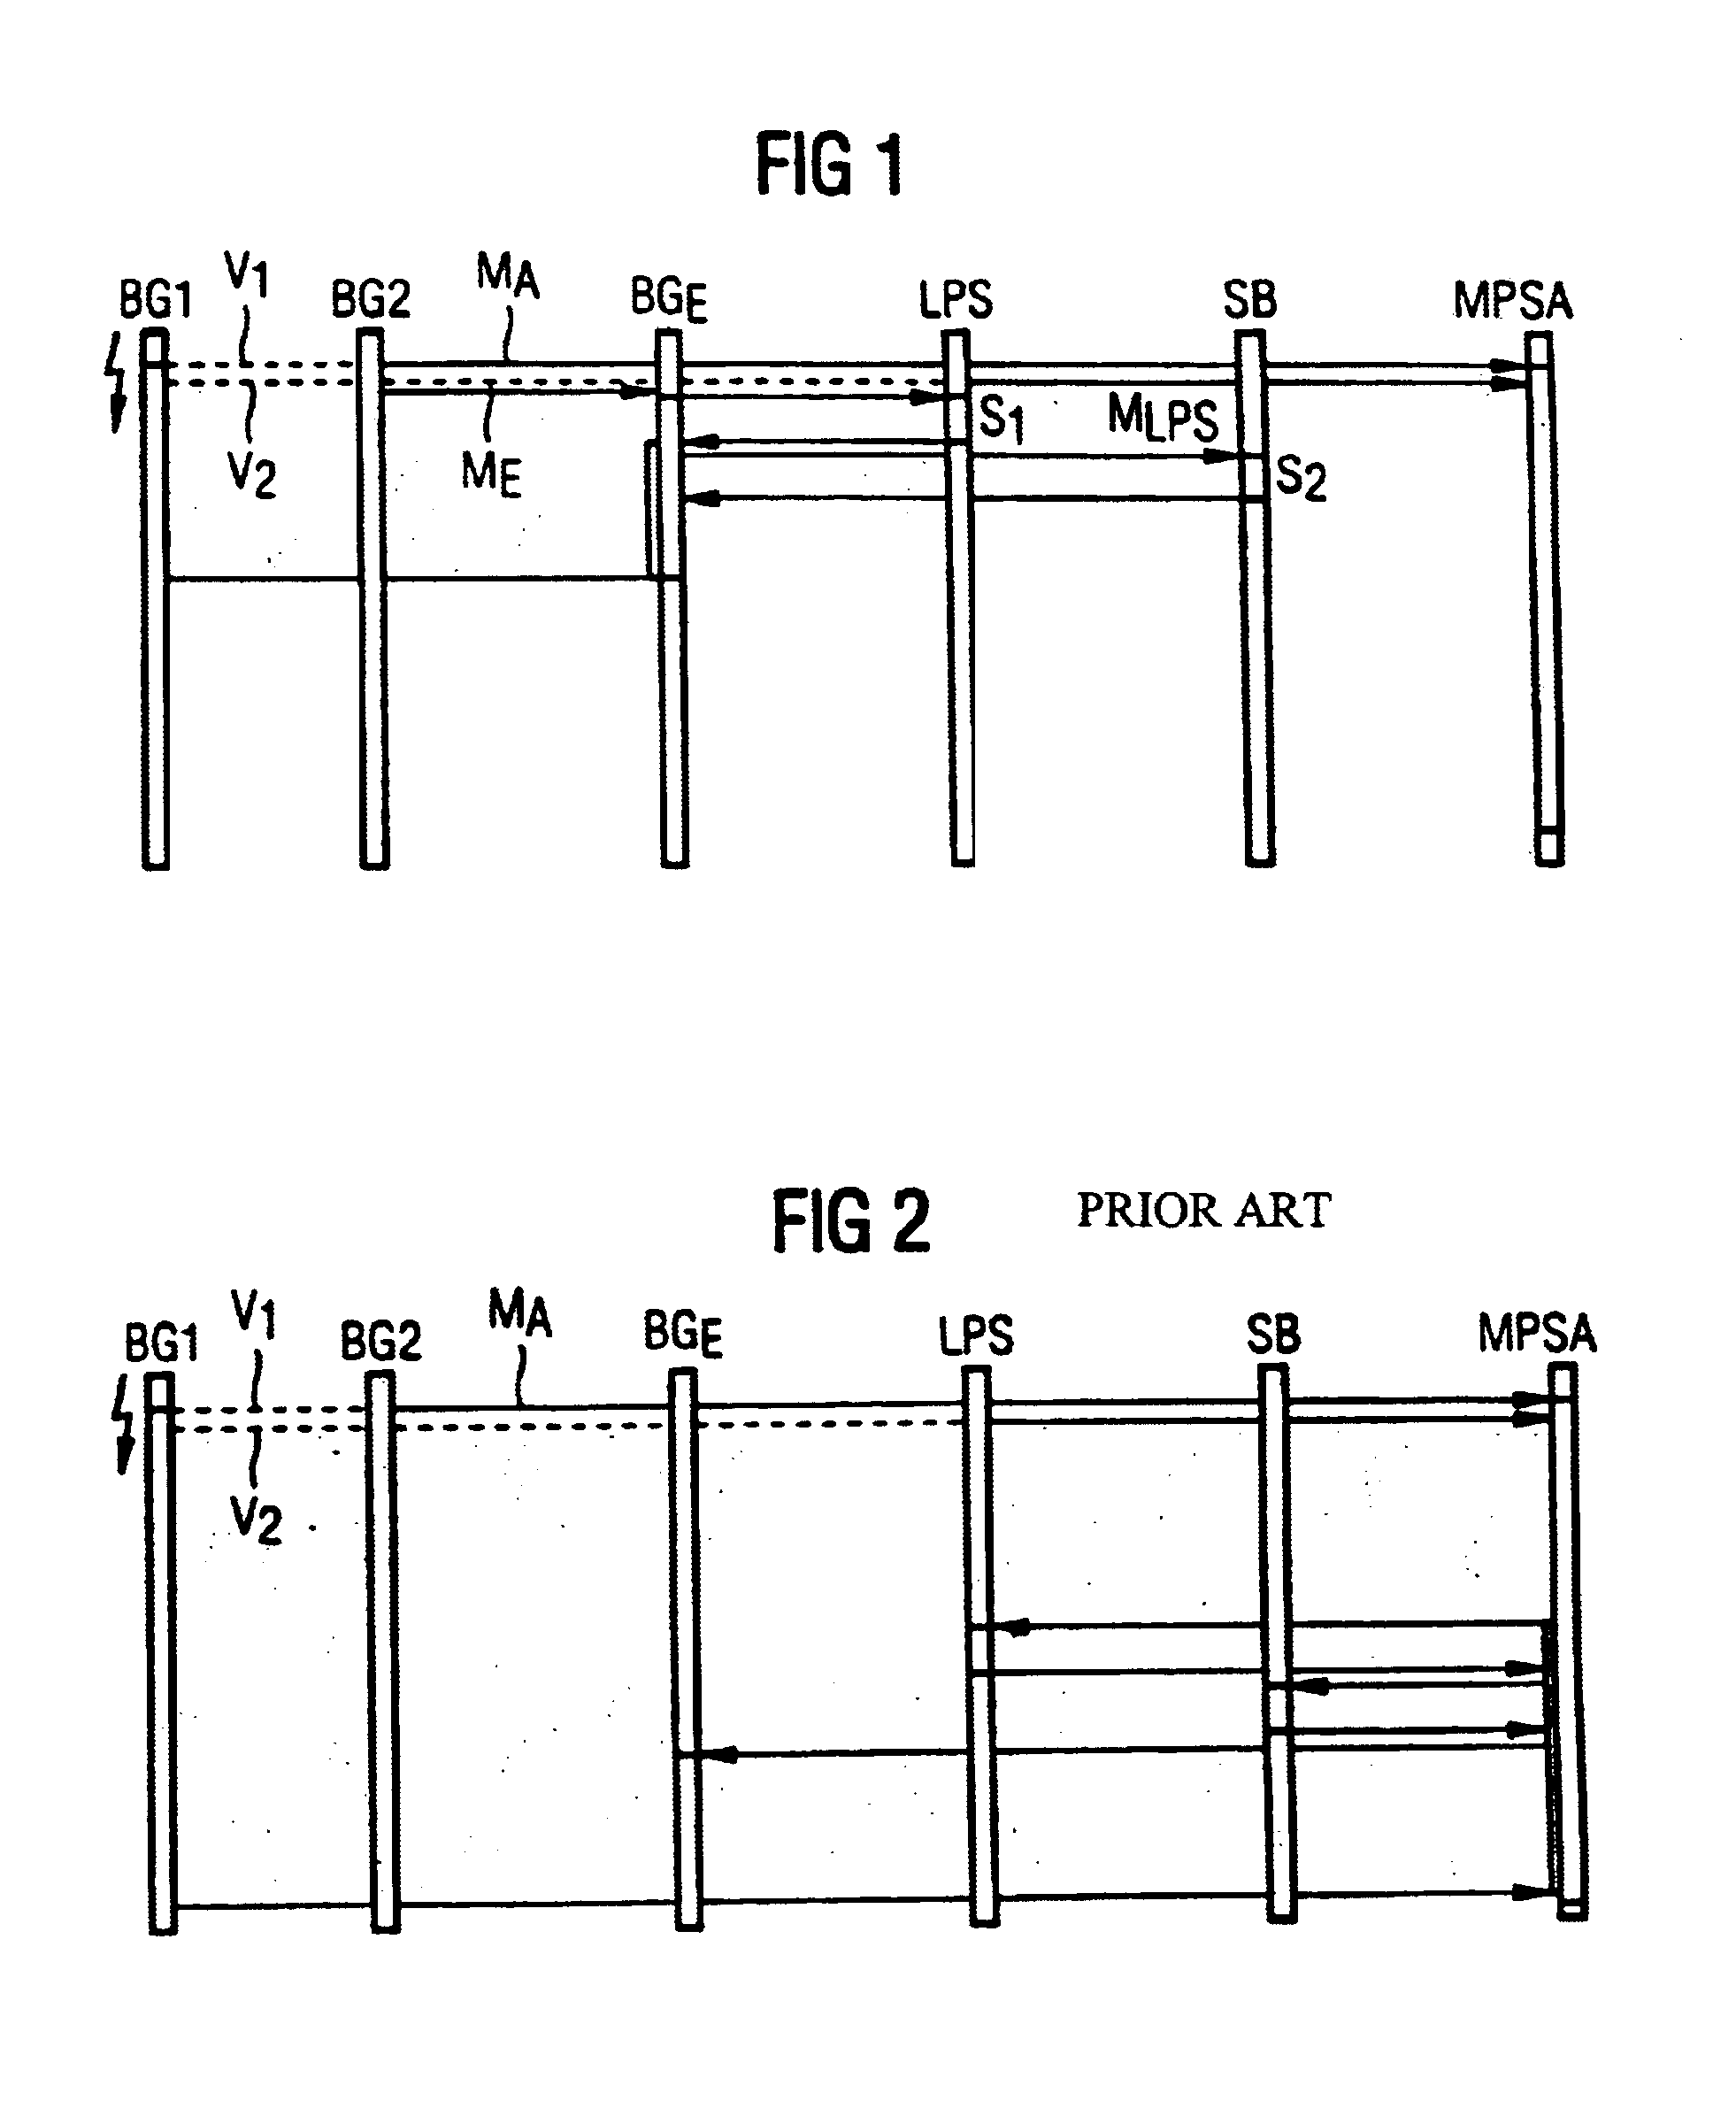 Method for equivalently connecting subassemblies in 1:N redundancy